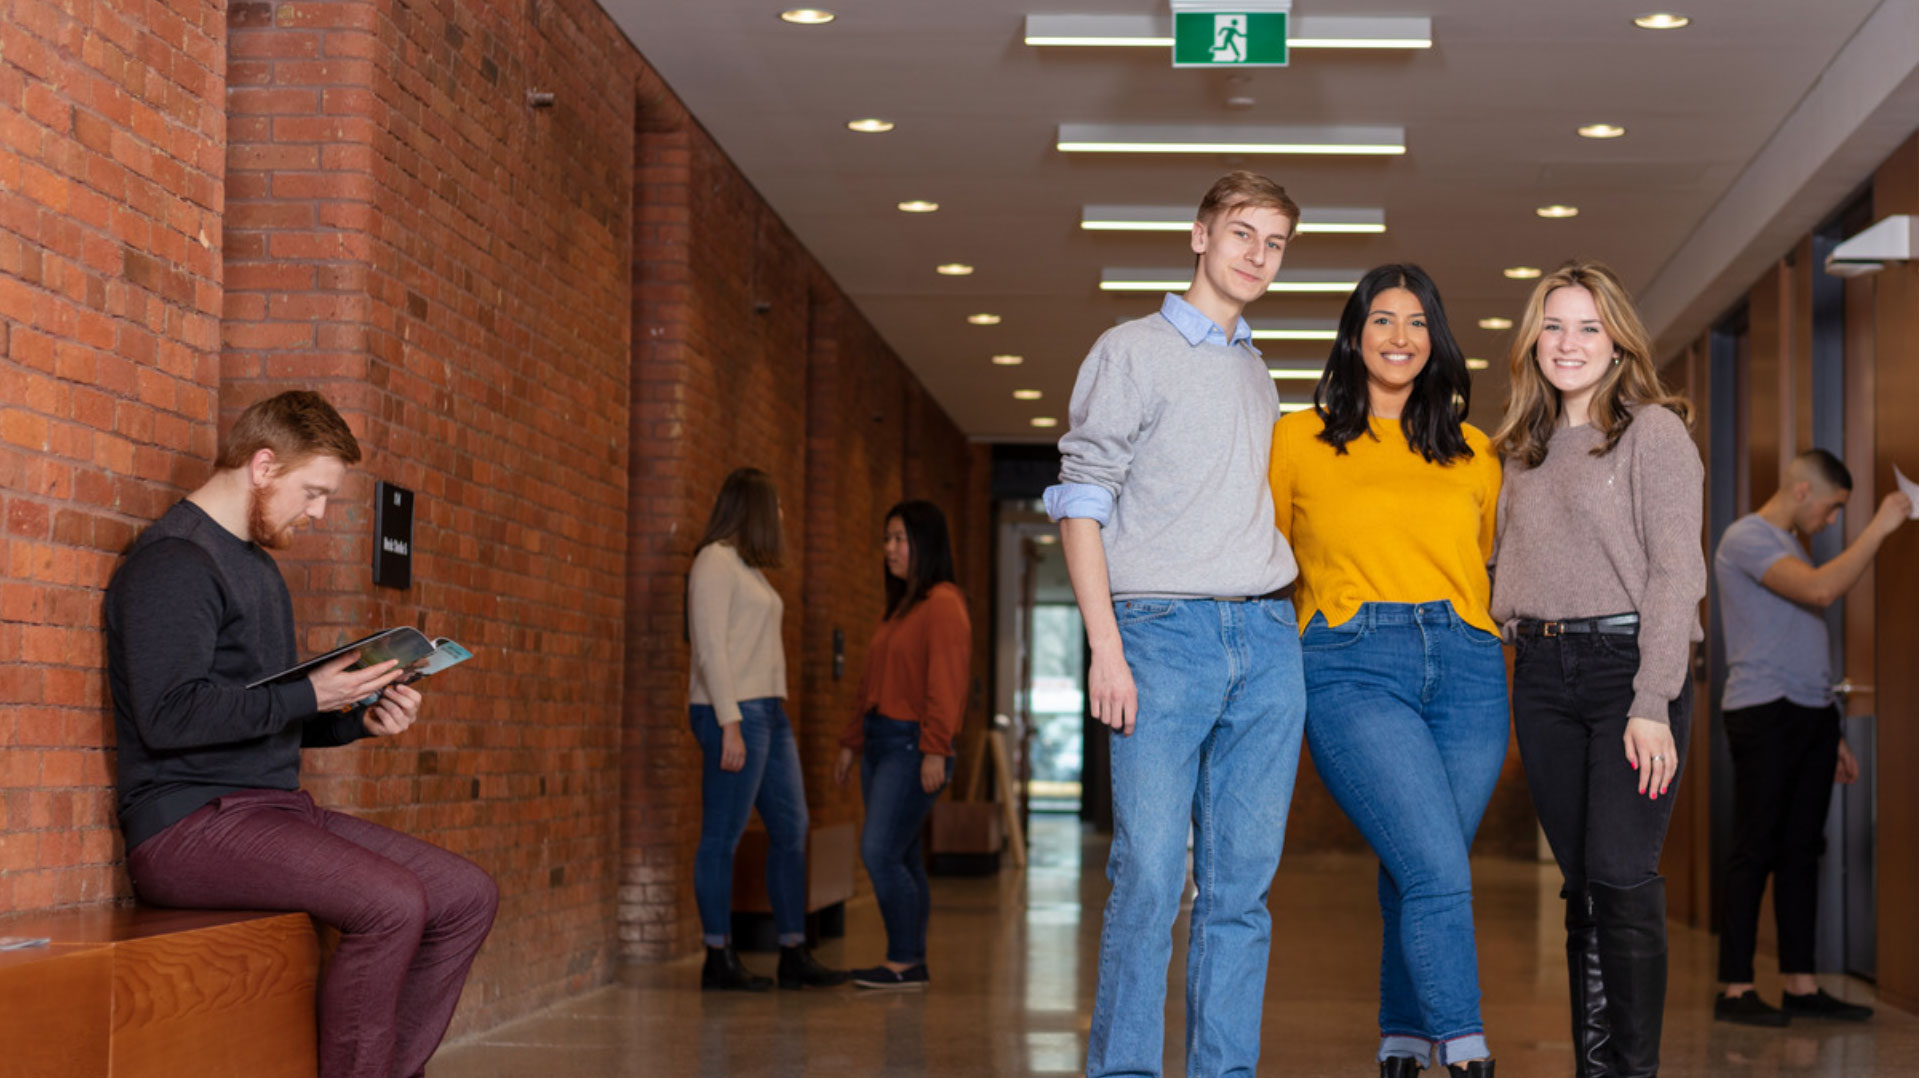 Three students smiling in a hallway